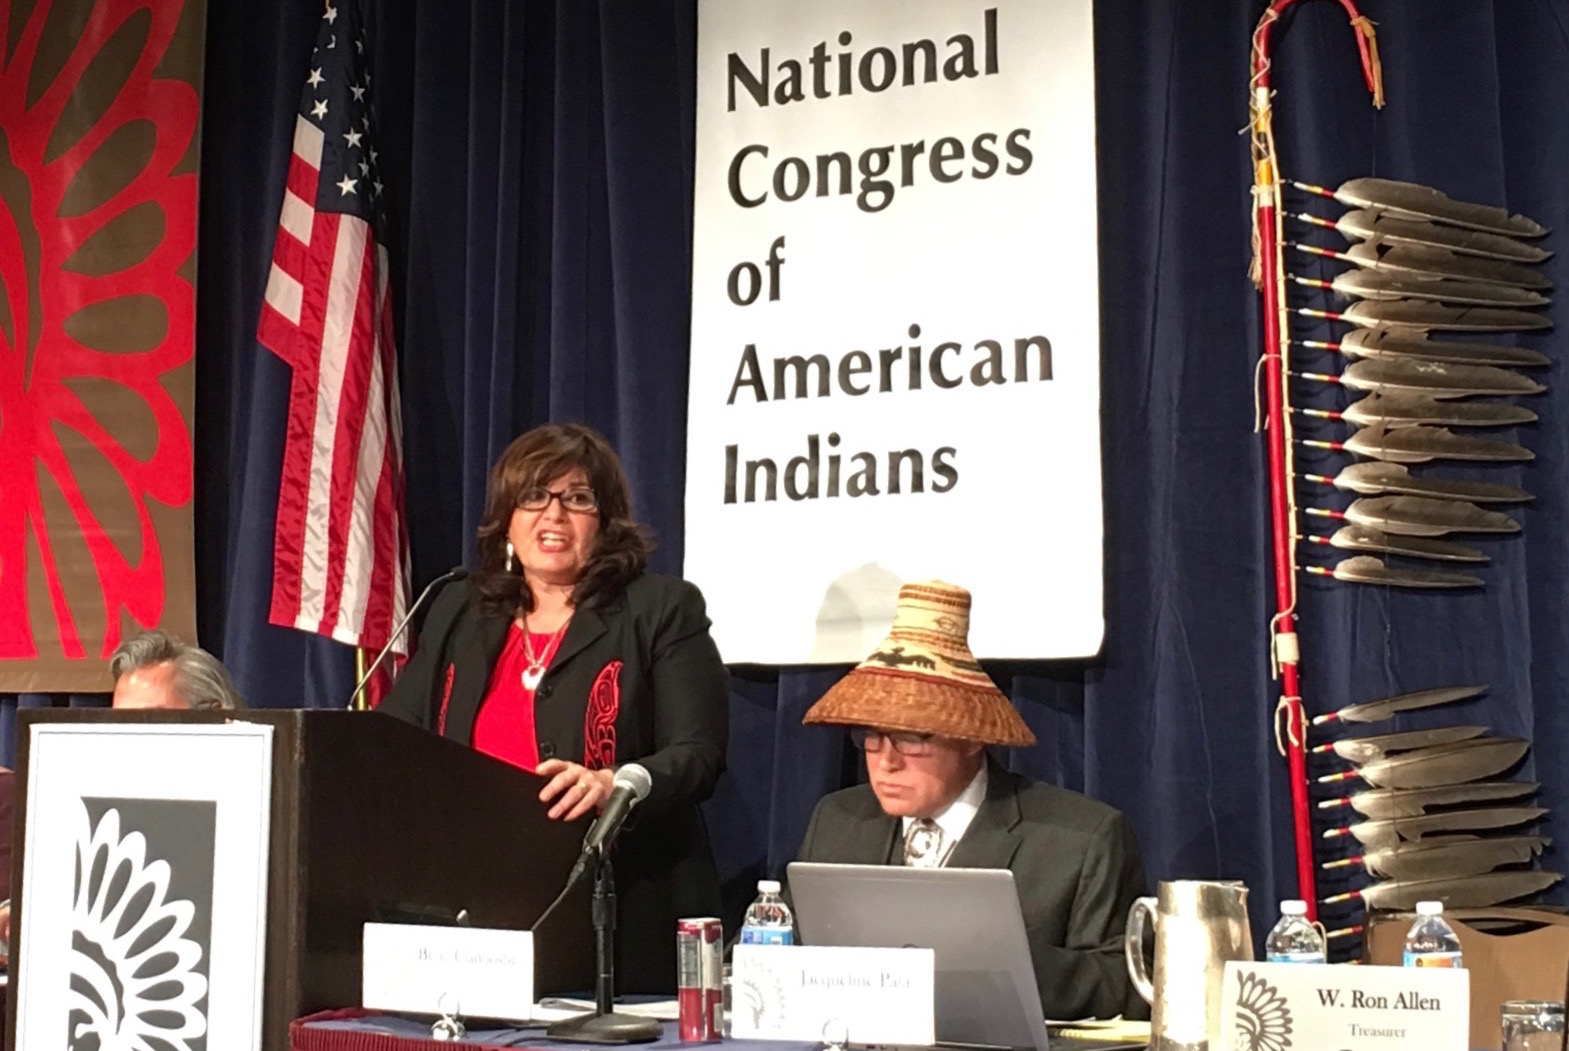 Tribes still shoring up support for Tribal Labor Sovereignty Act